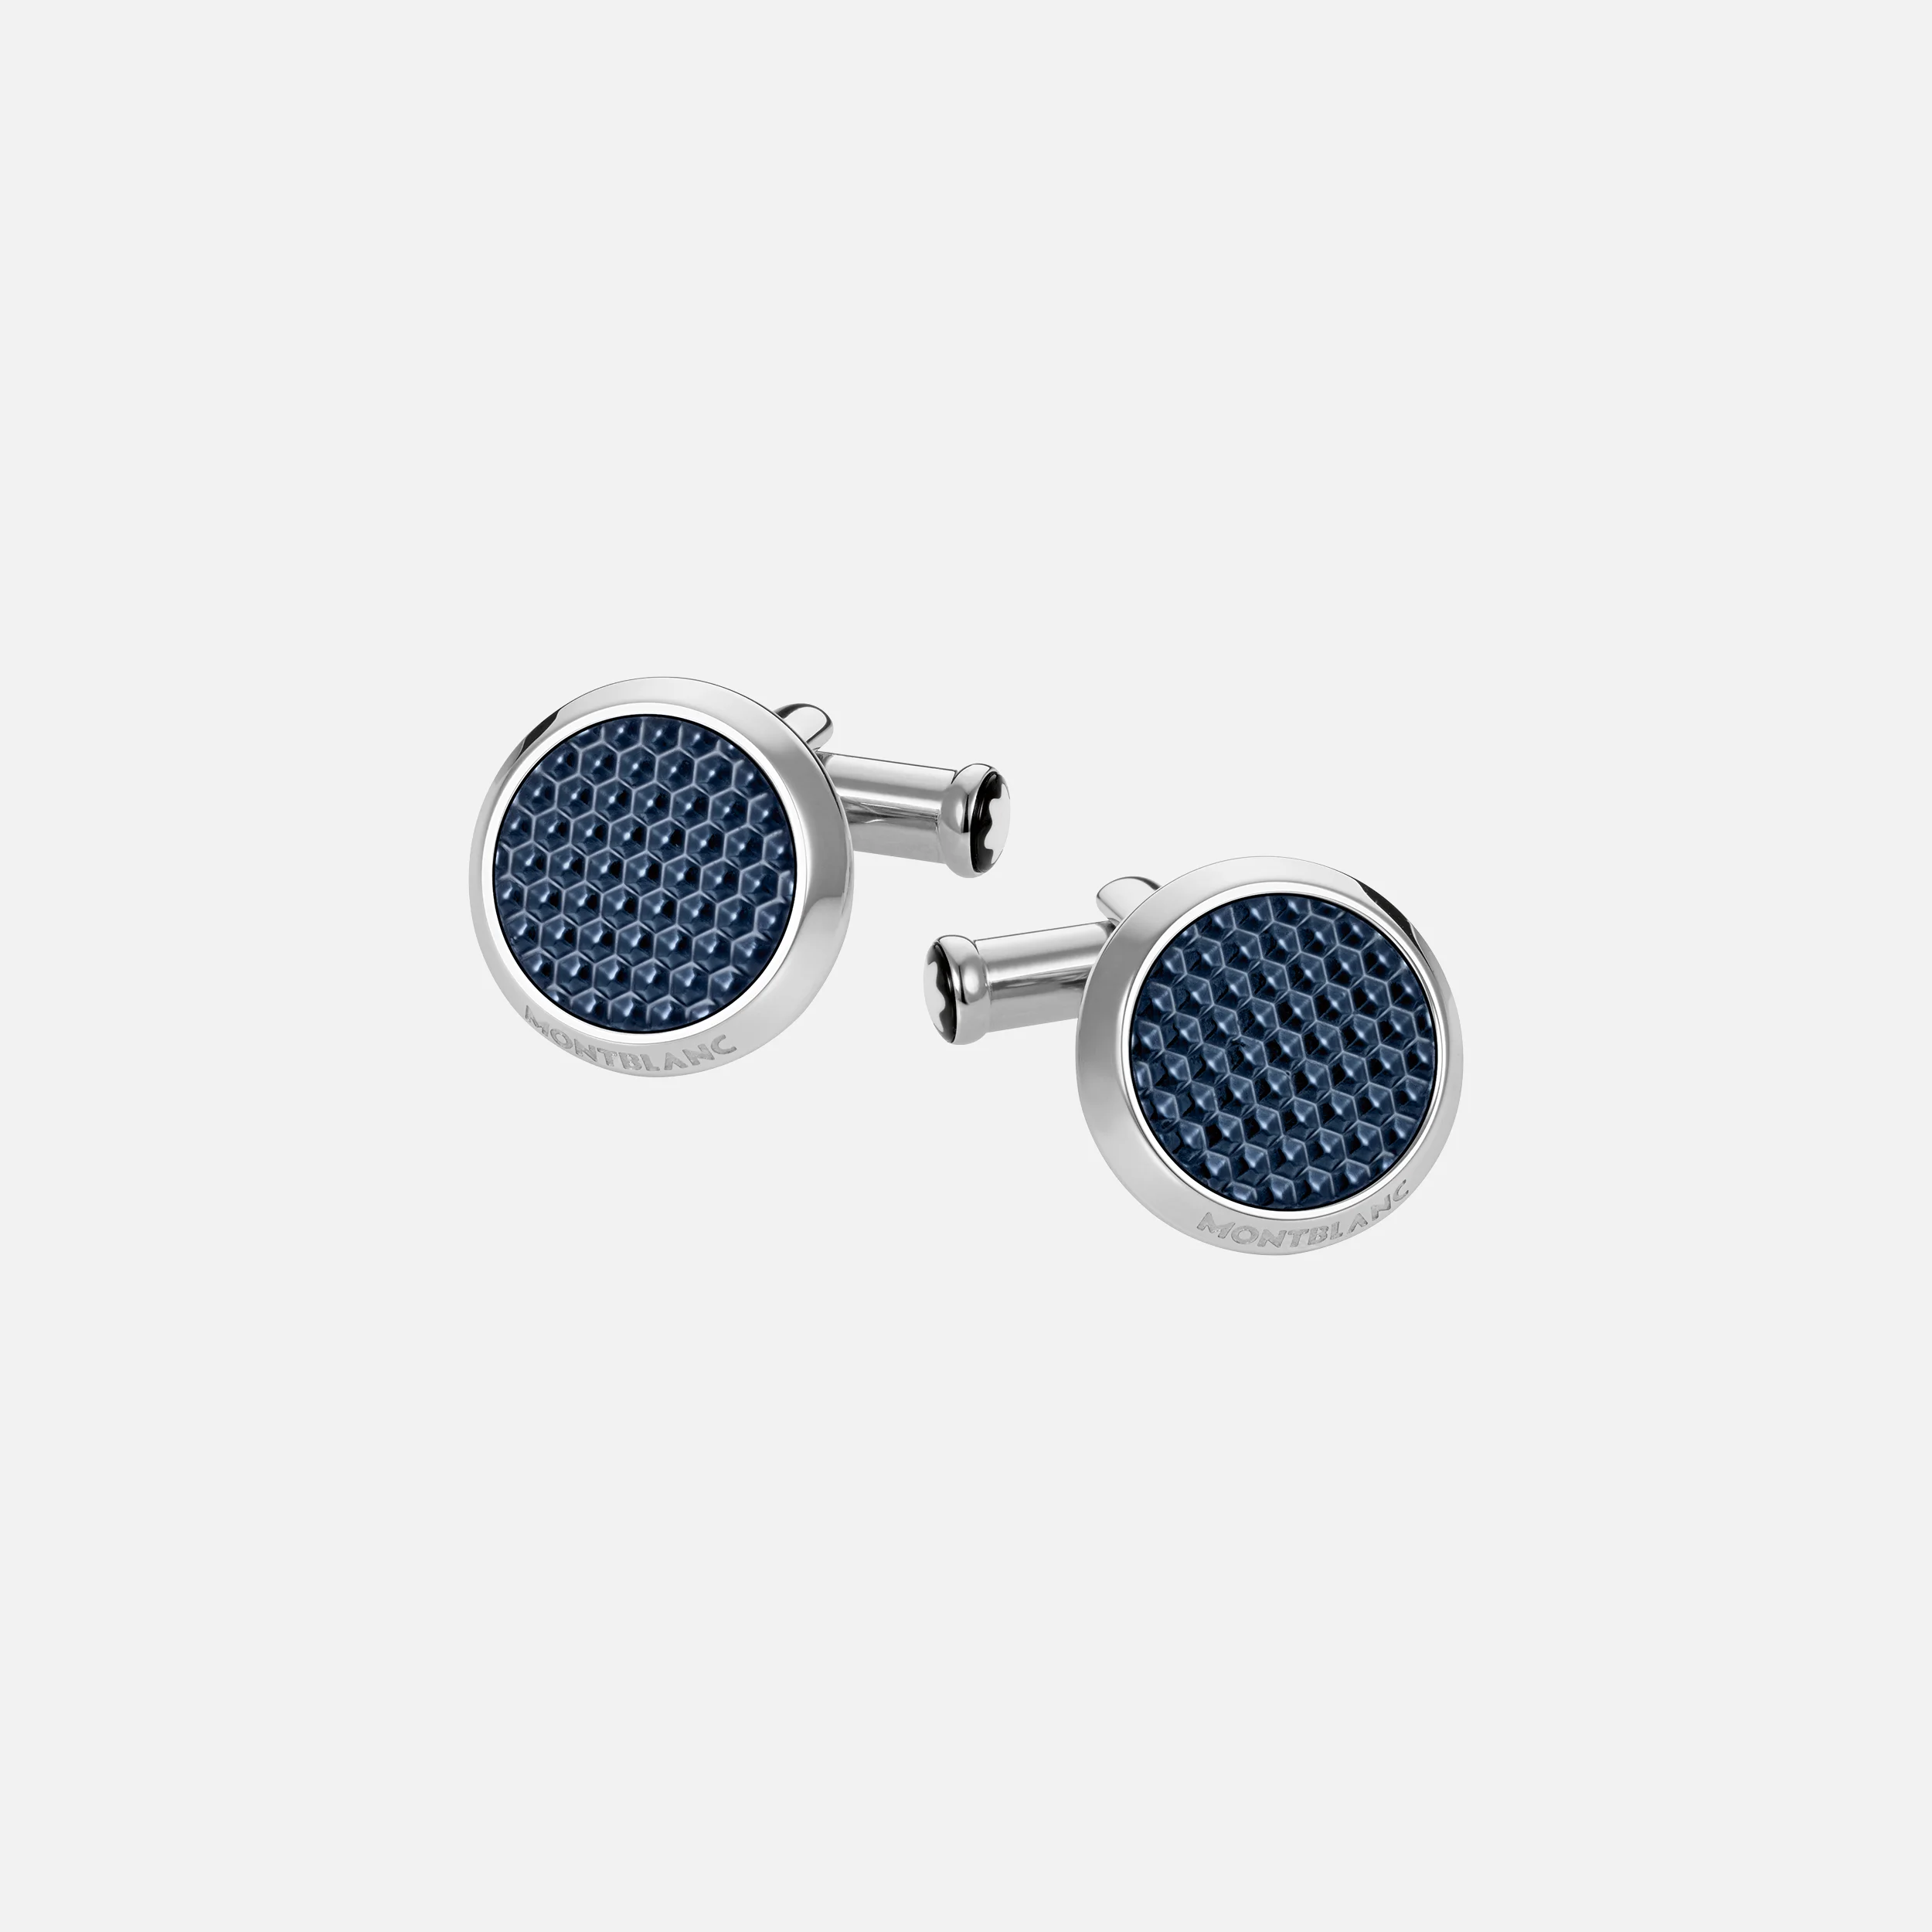 Montblanc MEISTERSTÜCK CUFFLINKS IN STEEL BLUE LACQUER - Pencraft the boutique